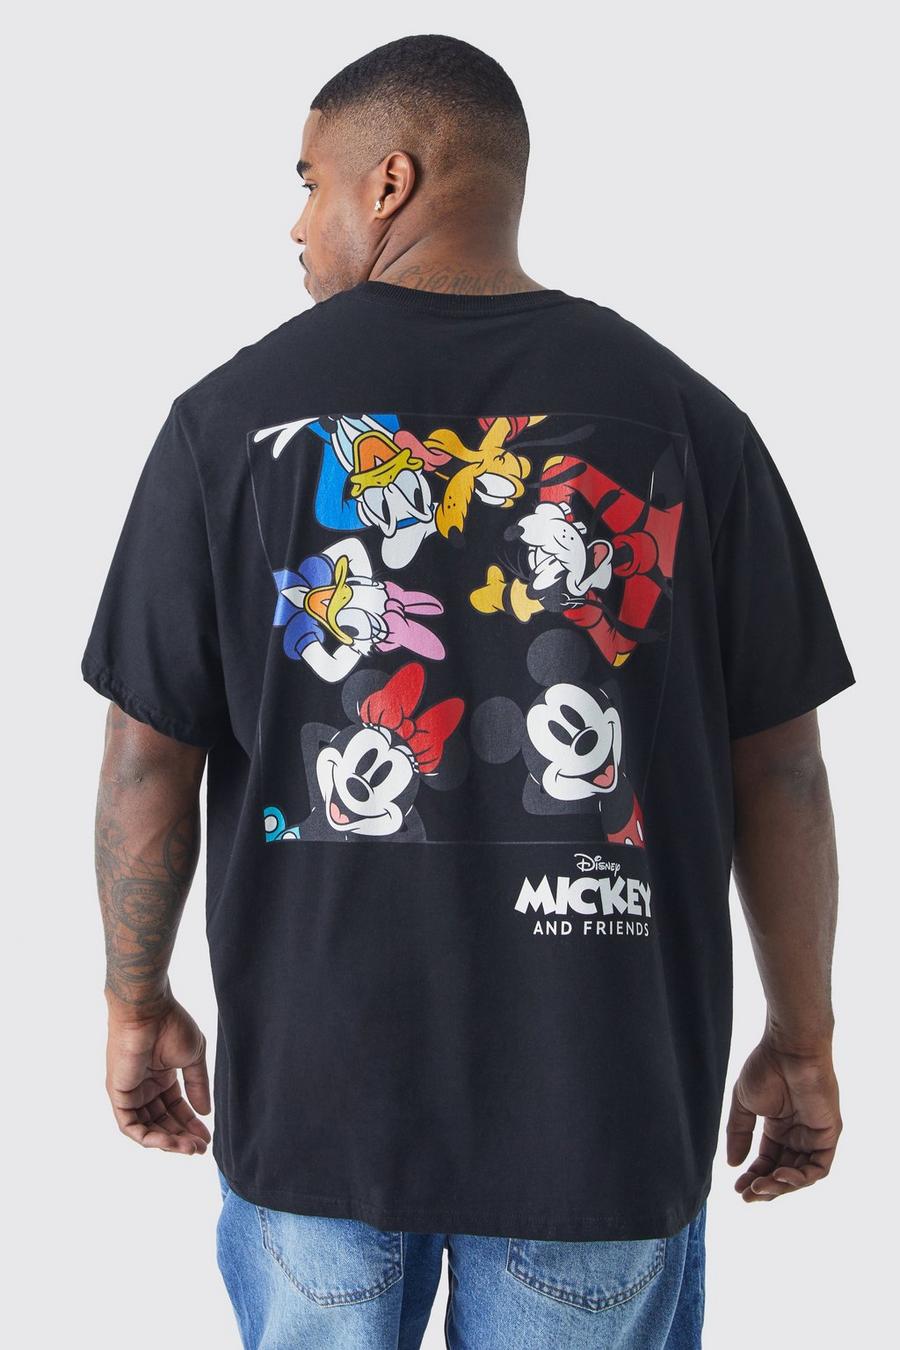 T-shirt Plus Size ufficiale di Mickey Mouse, Black image number 1